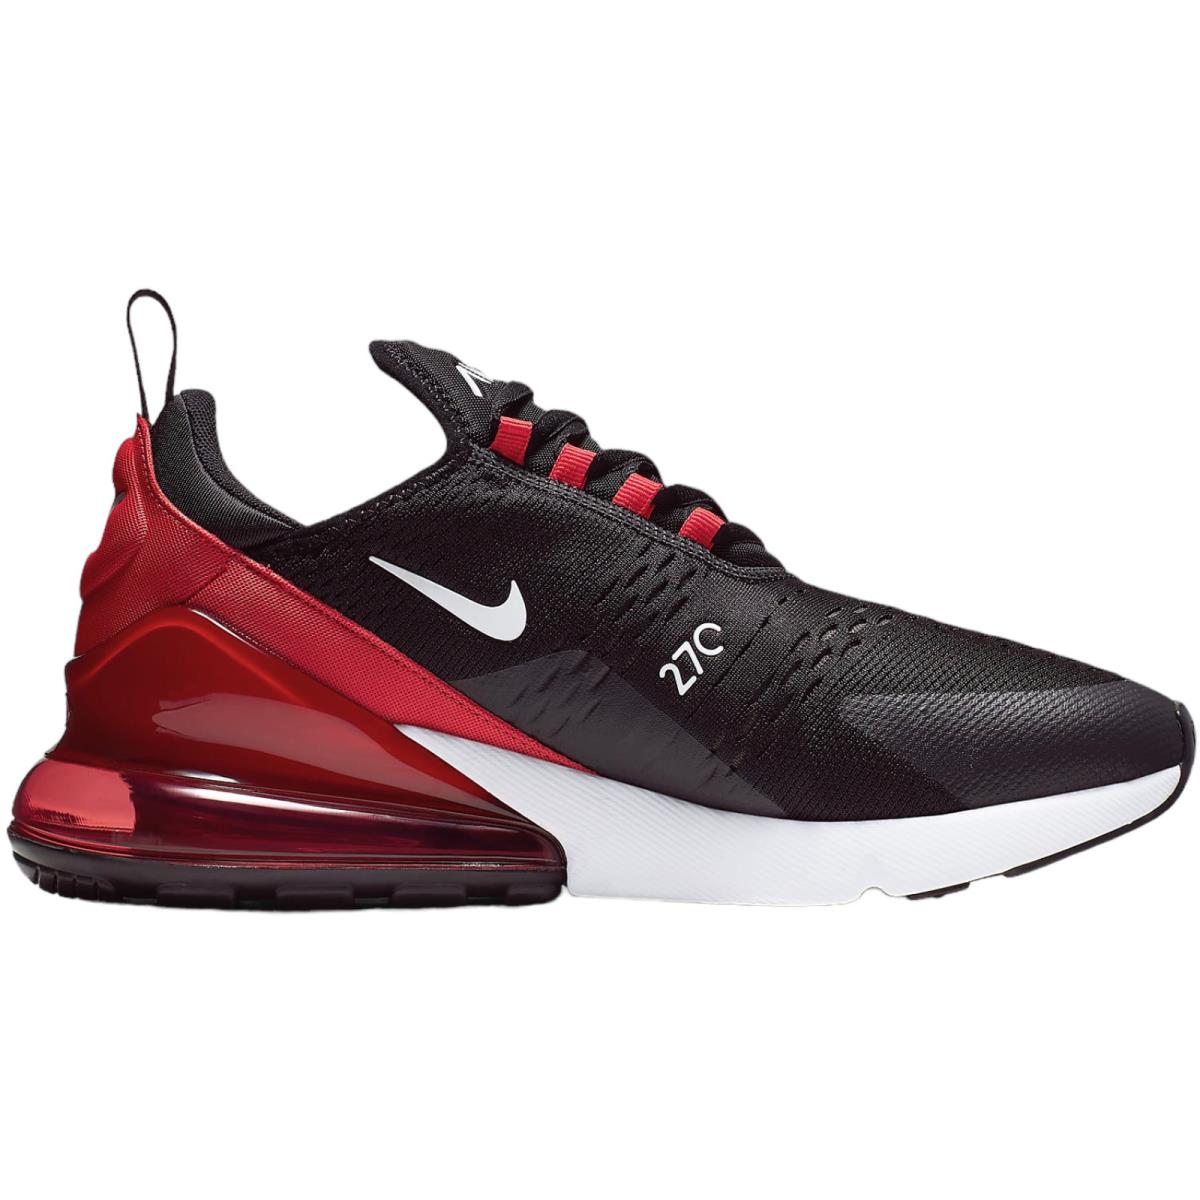 Nike Air Max 270 Men`s Casual Shoes All Colors US Sizes 7-14 Black/White/University Red/Anthracite